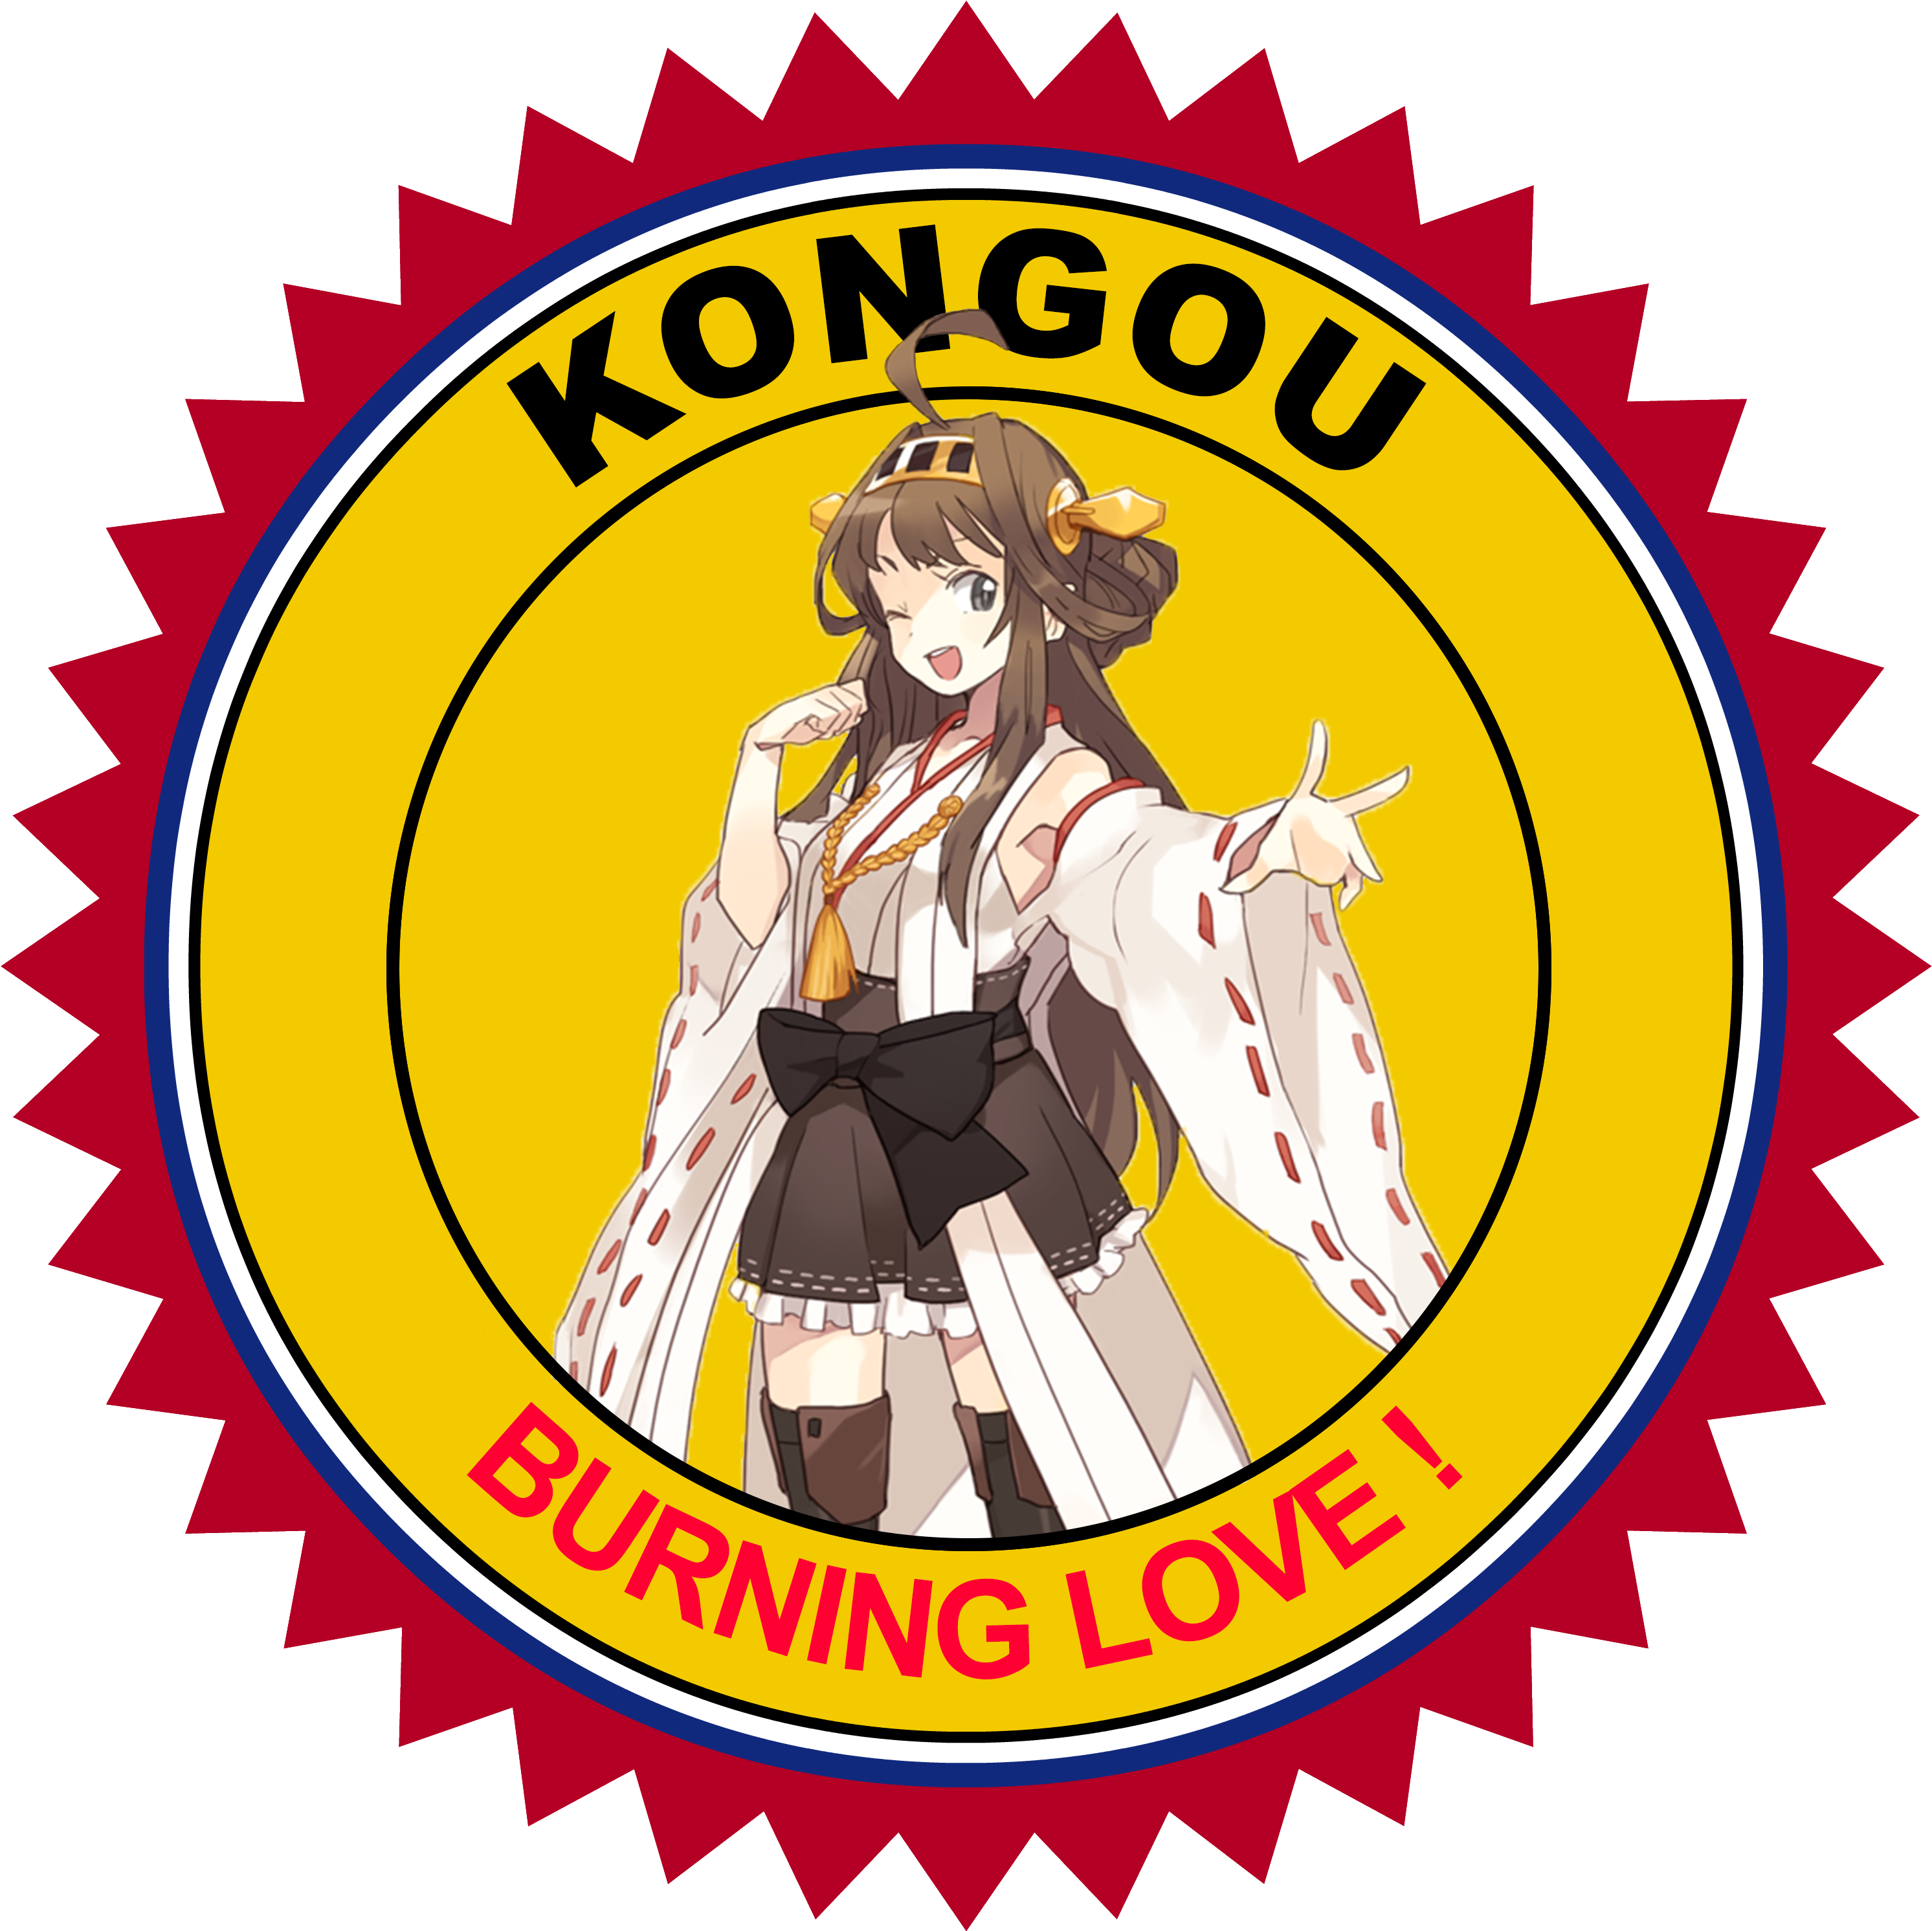 Seal Of Approval Kongou 4 Burning Love By Jigaraphale - Pedobear Seal Of Approval (3000x3000)